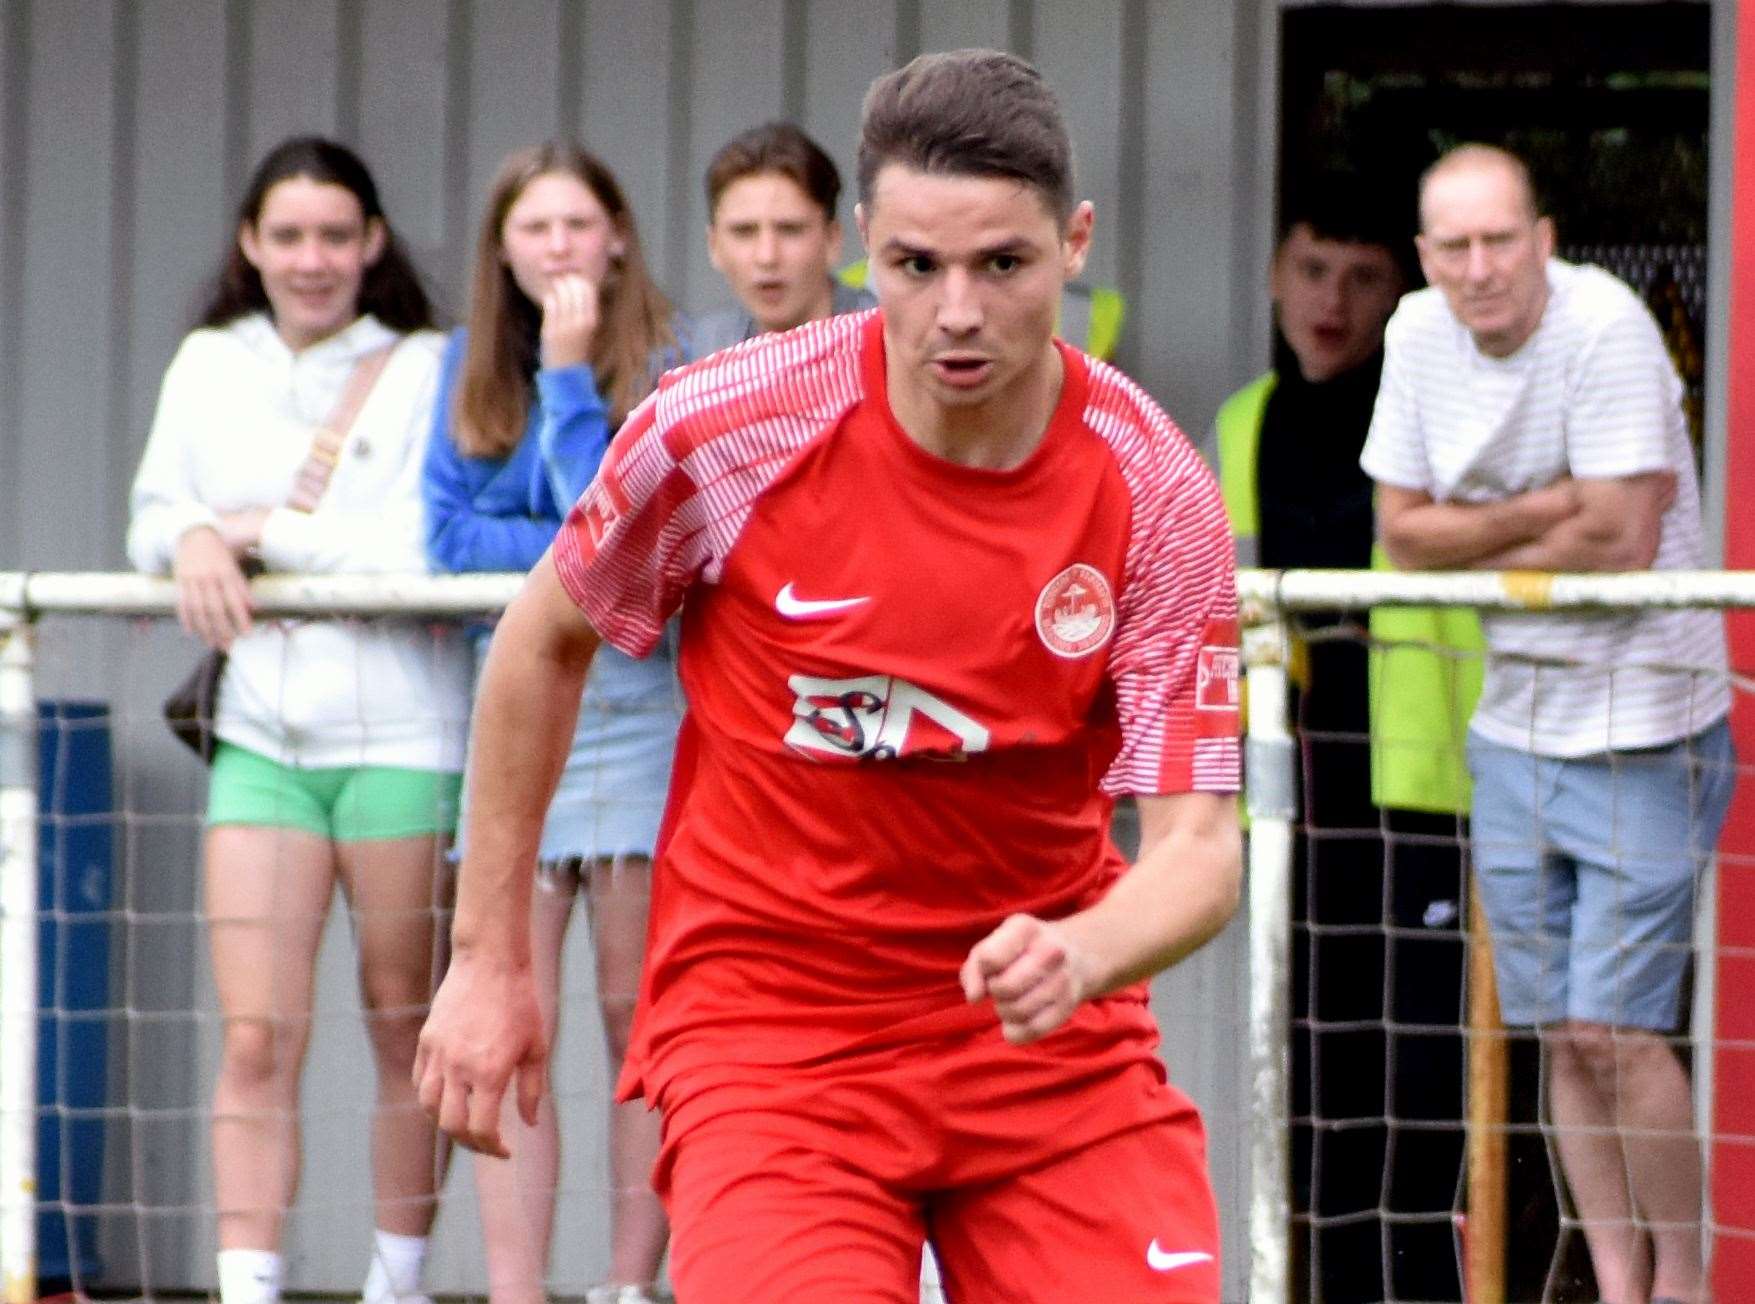 Jake Embery has changed his game since joining Hythe. Picture: Randolph File